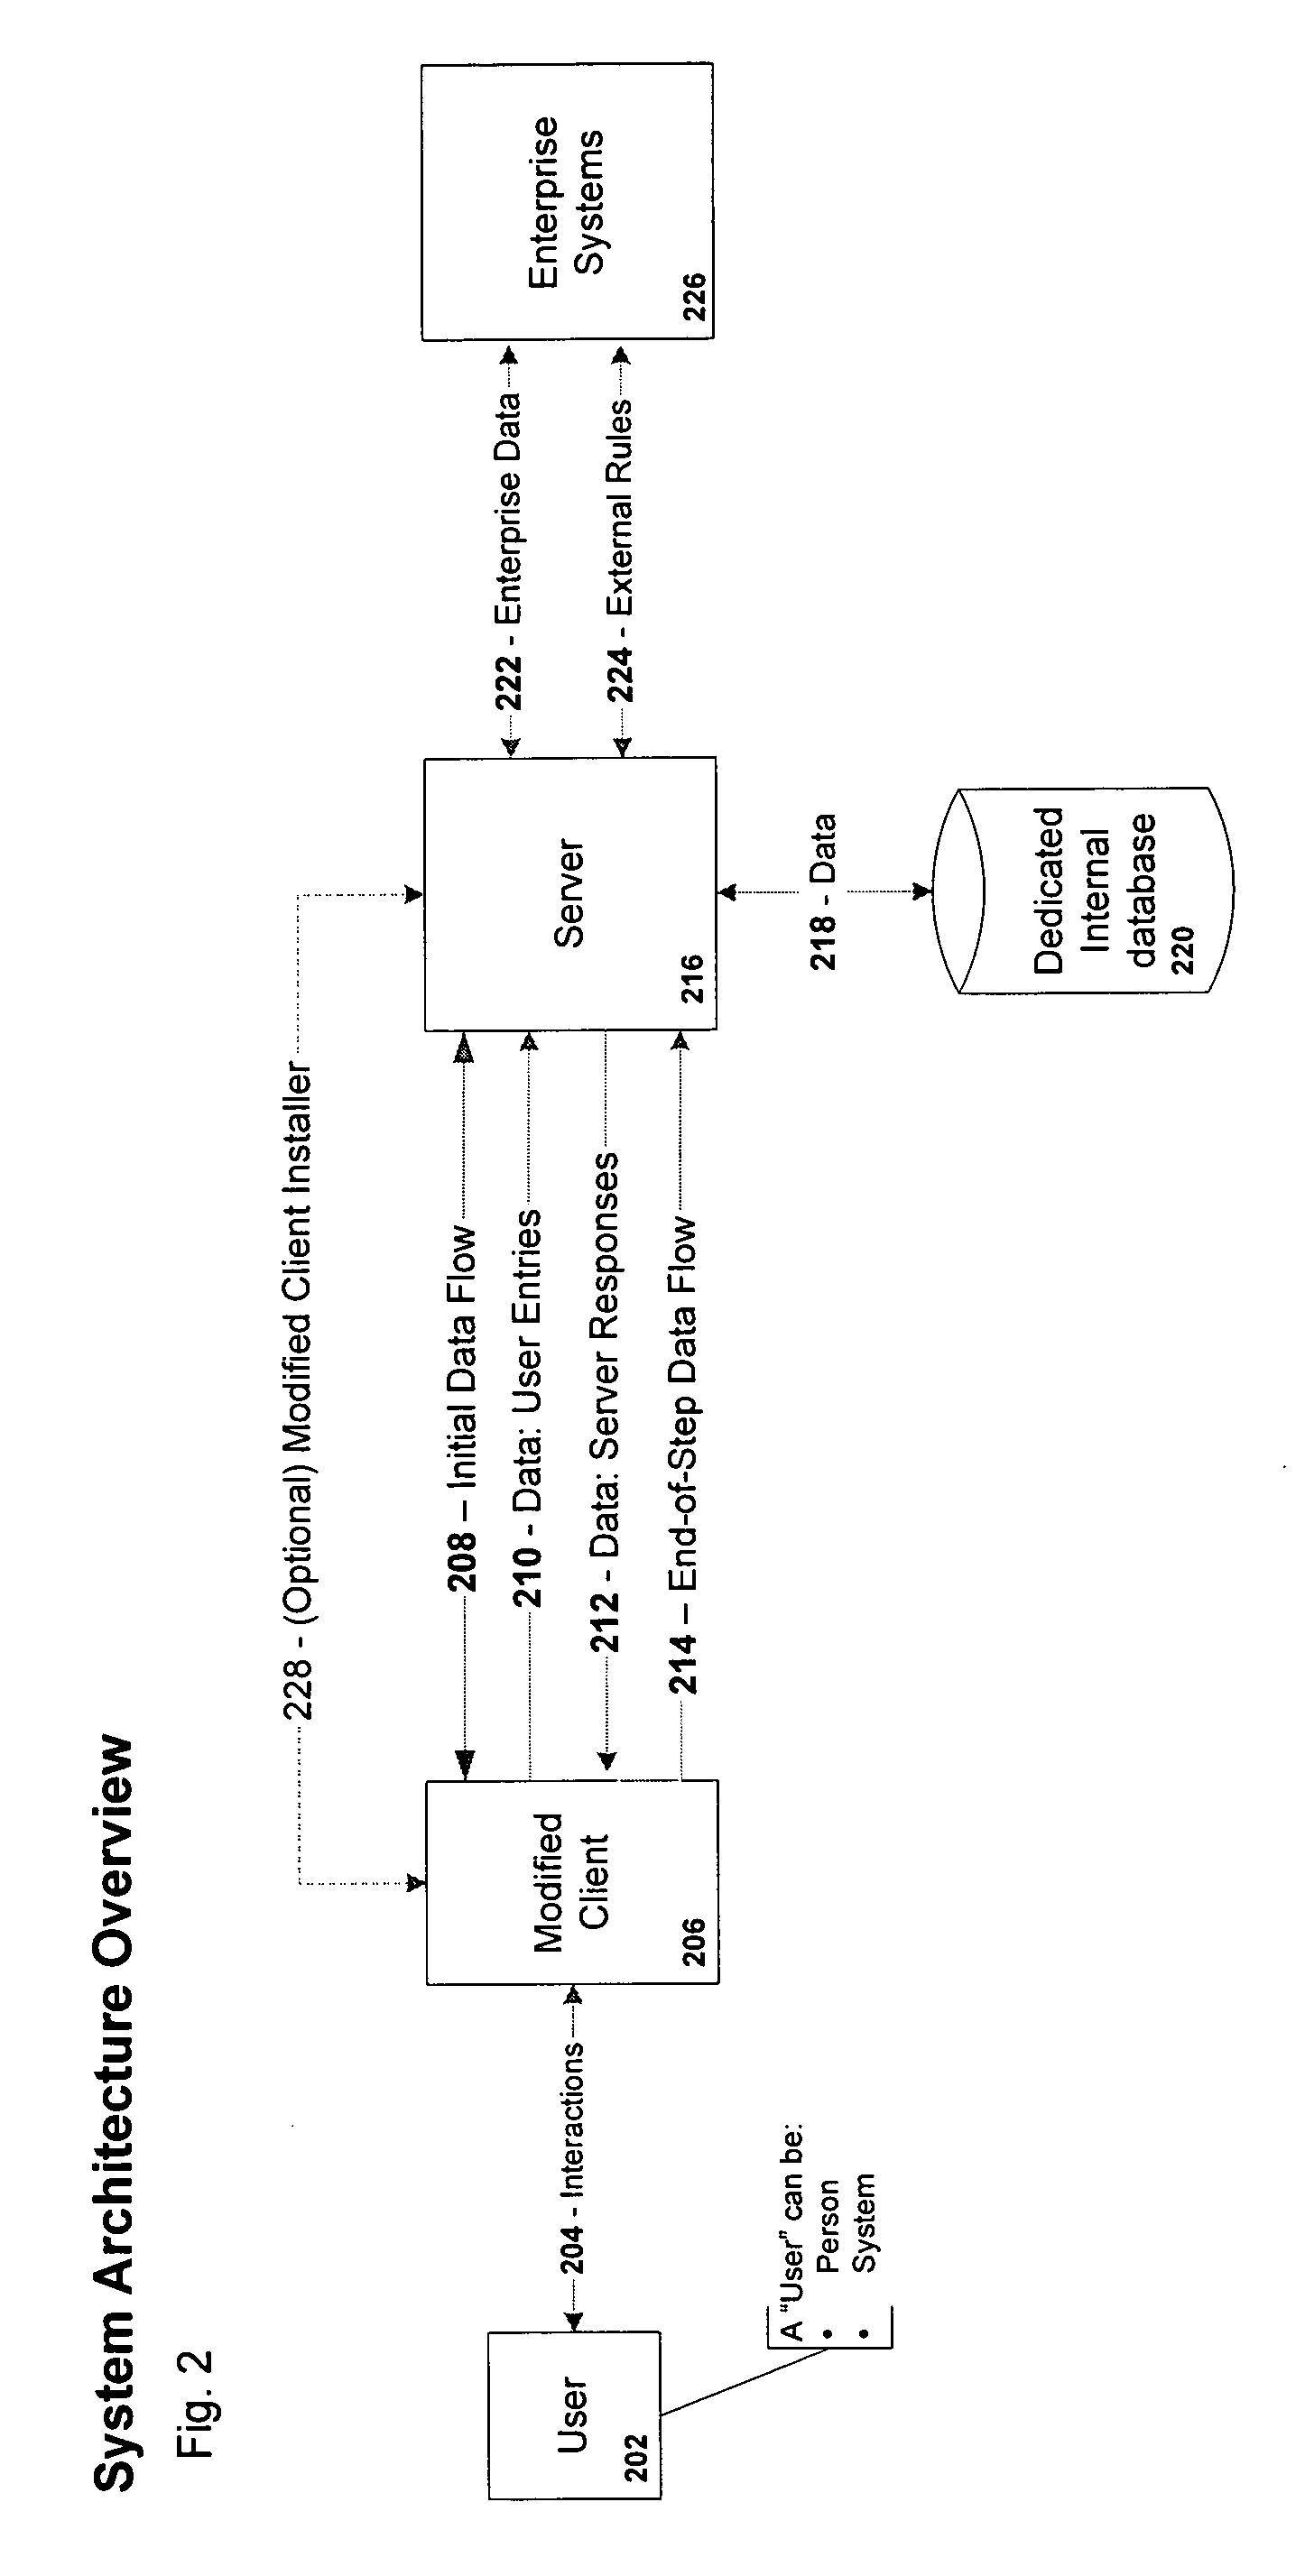 Business process automation system and methods of use thereof